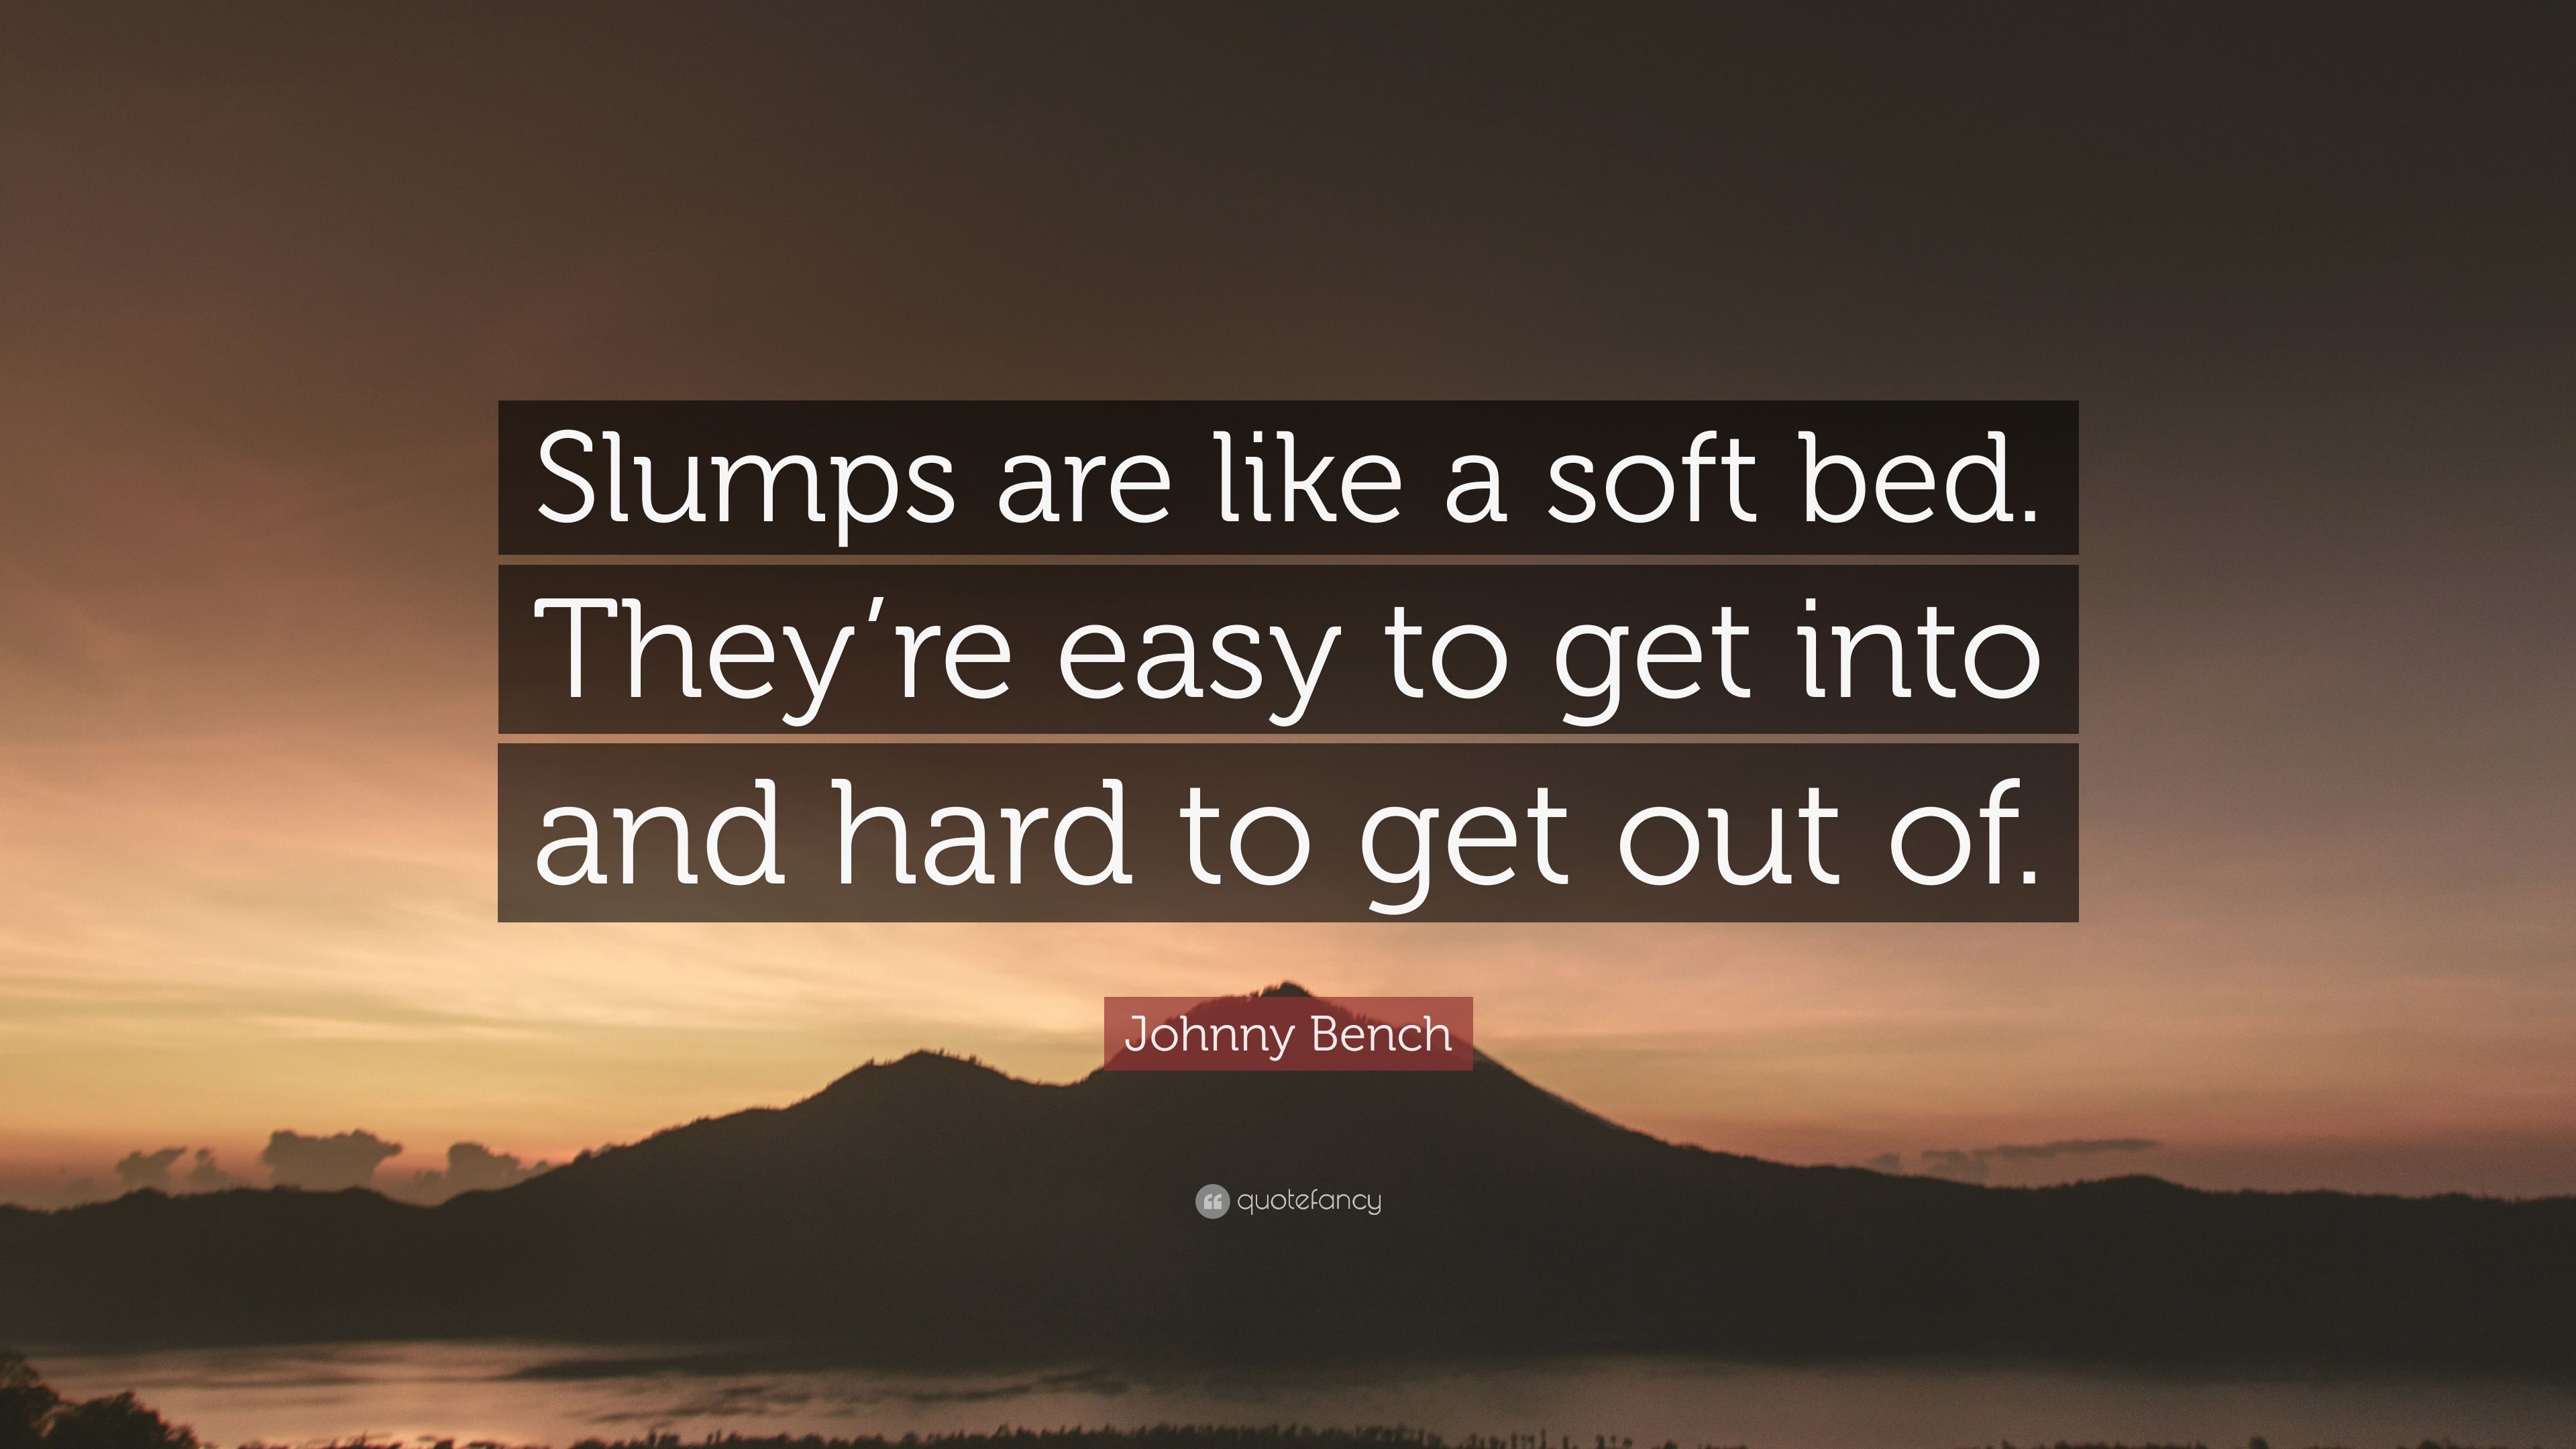 Johnny Bench Quote: “Slumps are like a soft bed. They're easy to